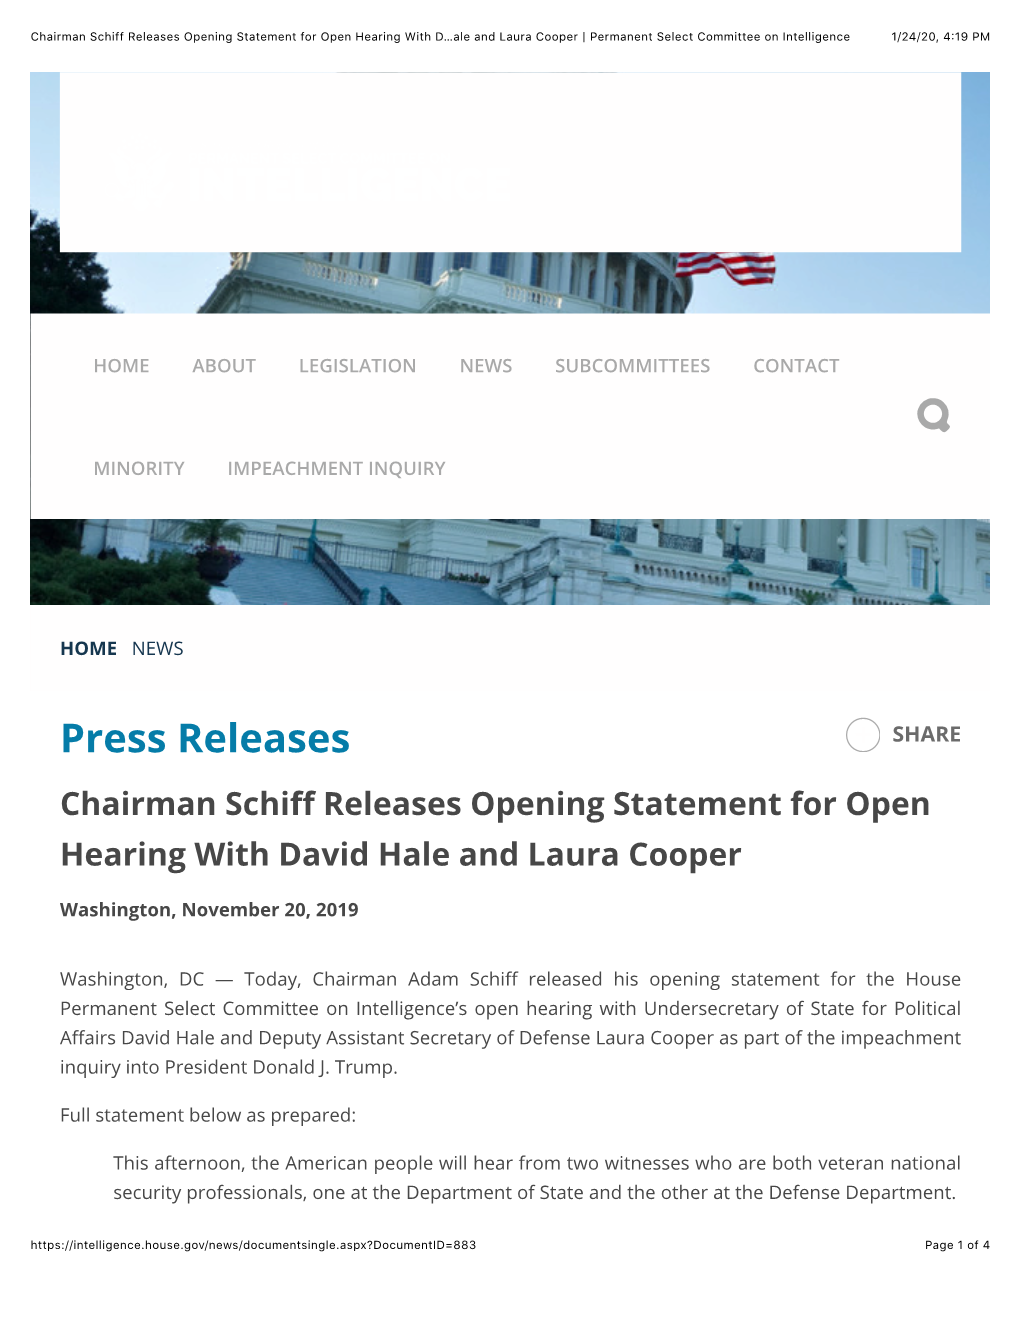 Chairman Schiff Opening Statement for Sixth Open Hearing